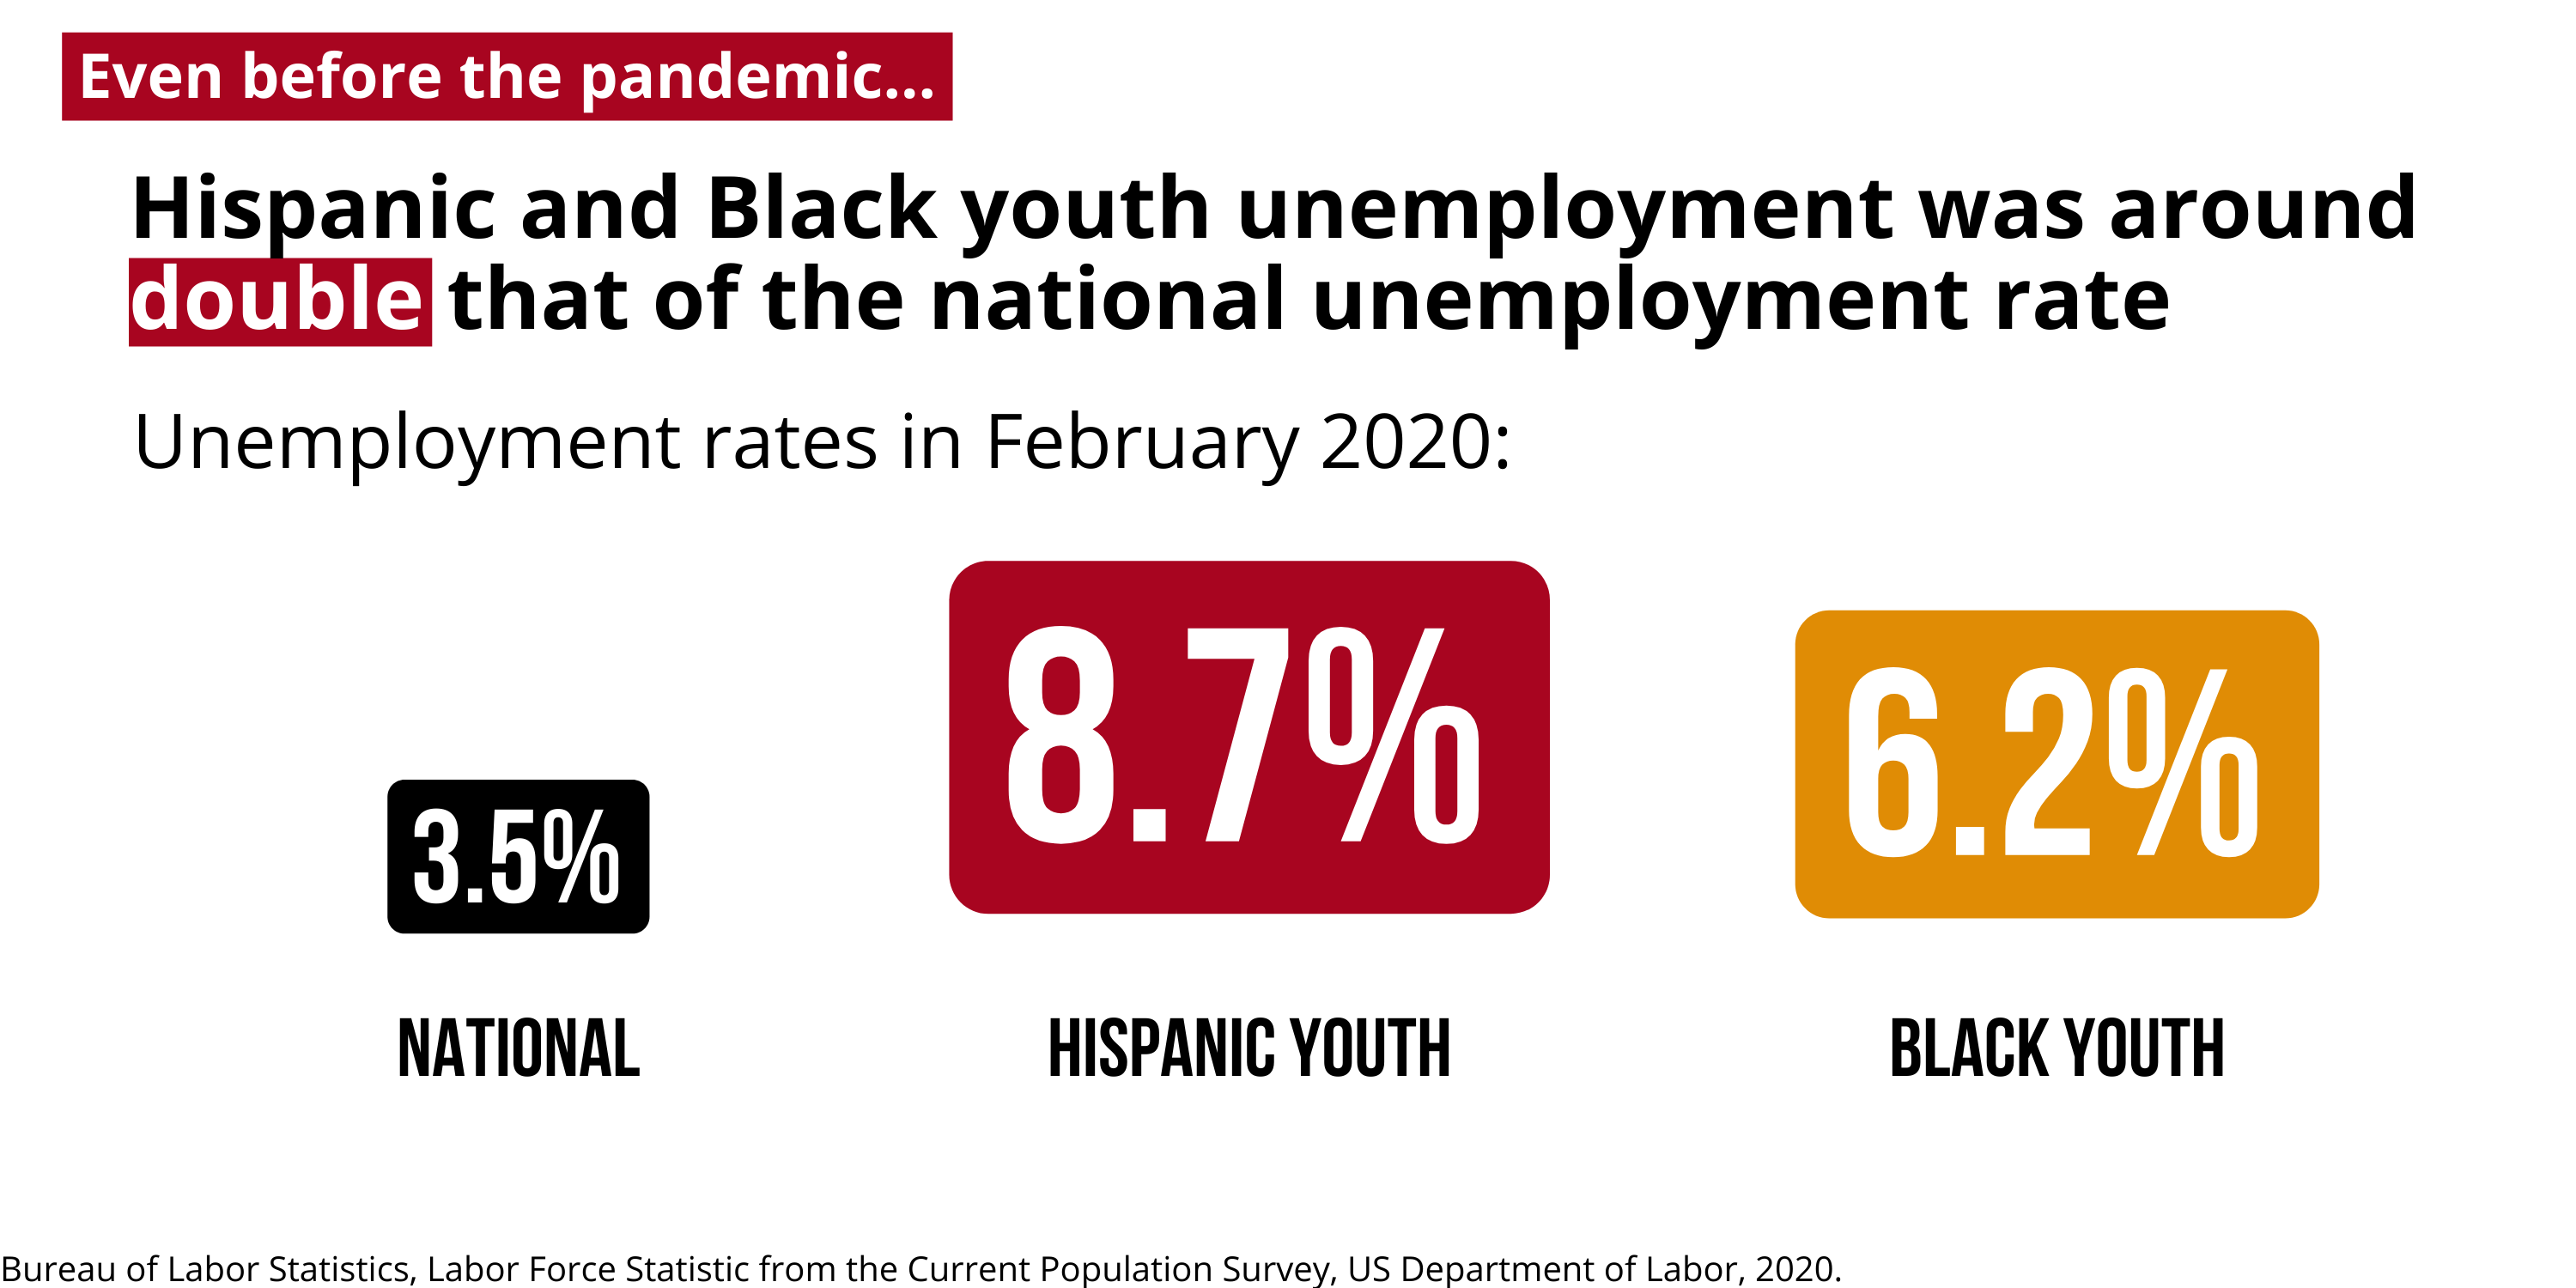 Hispanic and Black youth unemployment was around double that of the national unemployment rate